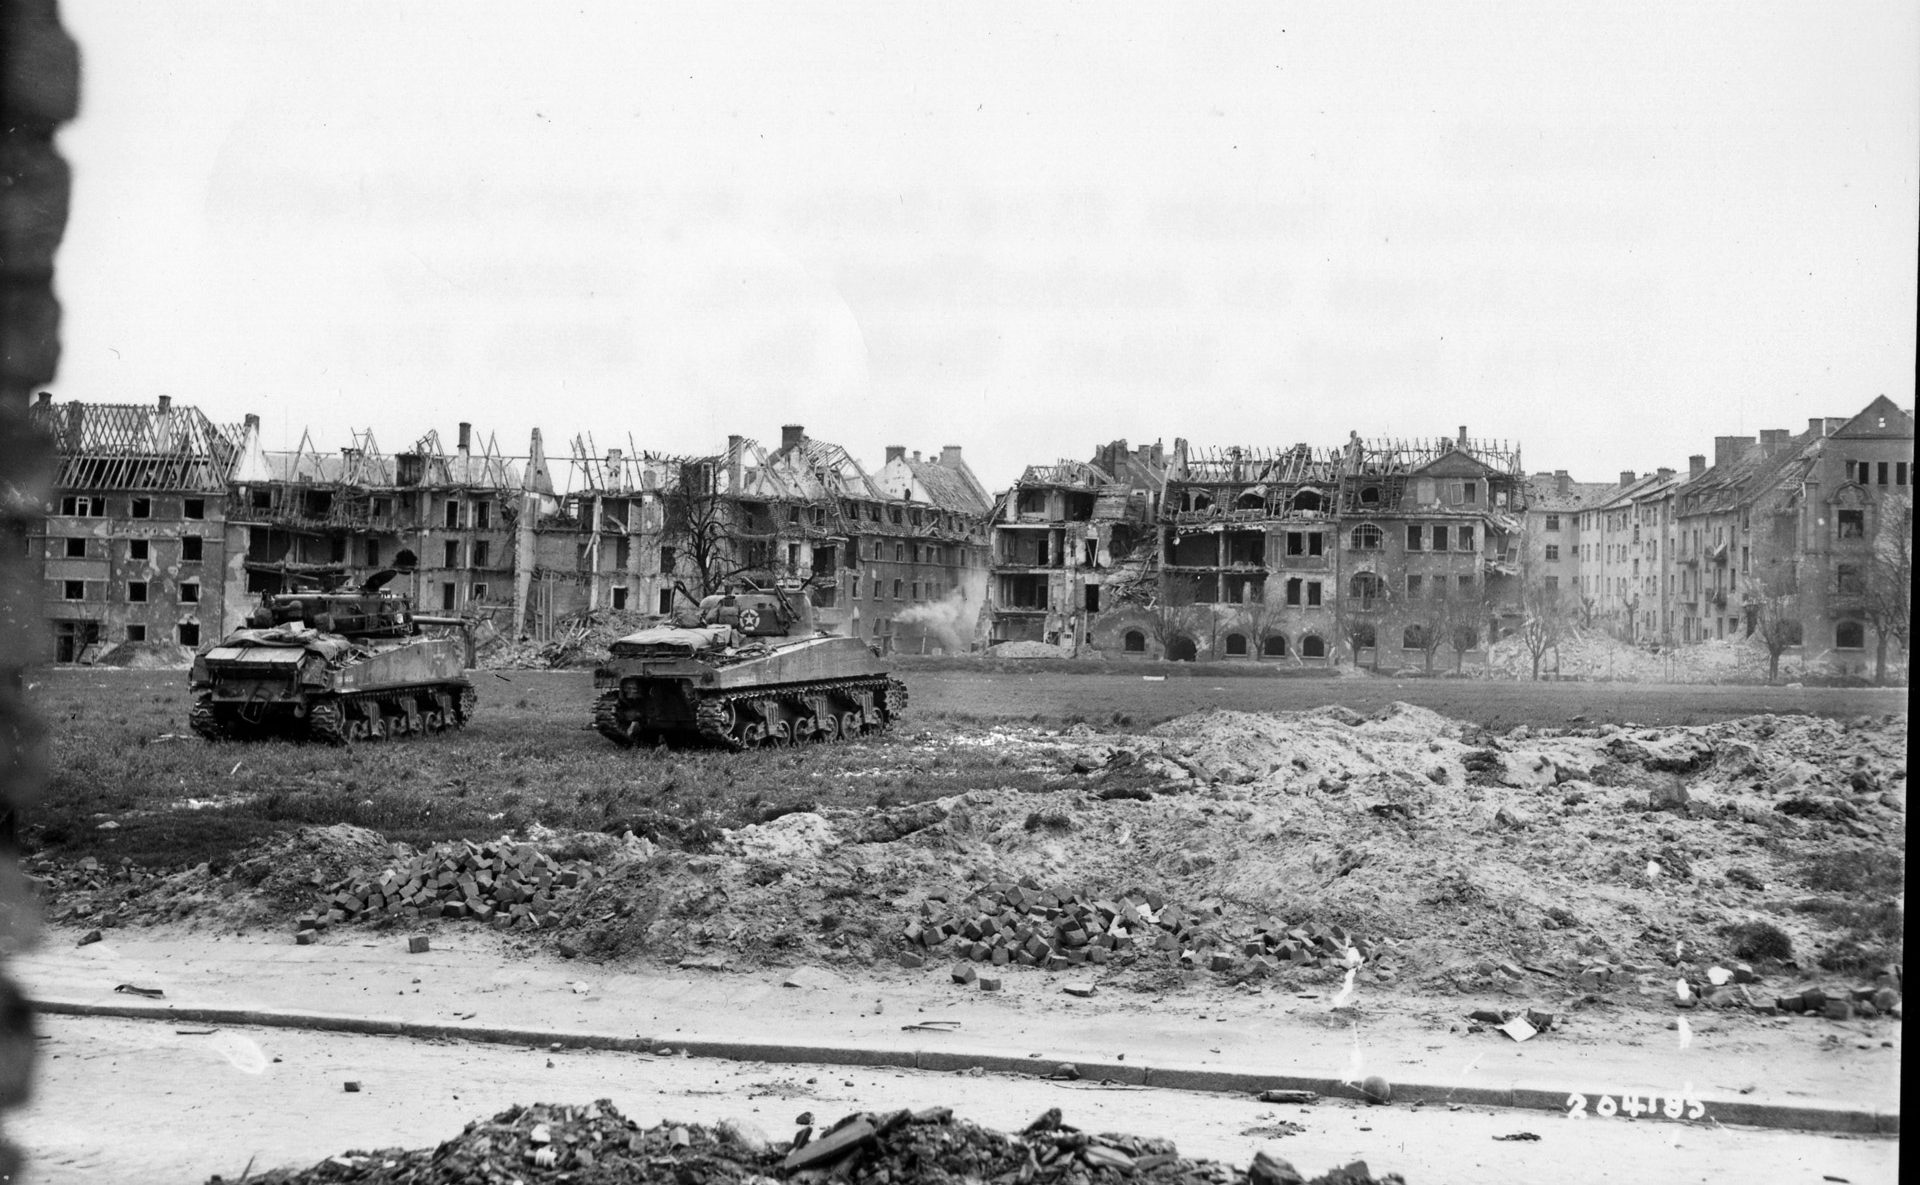 Sherman tanks train their guns on sniper positions at Aschaffenberg. German snipers were capable of holding up large formations of American troops unable to leave cover. 